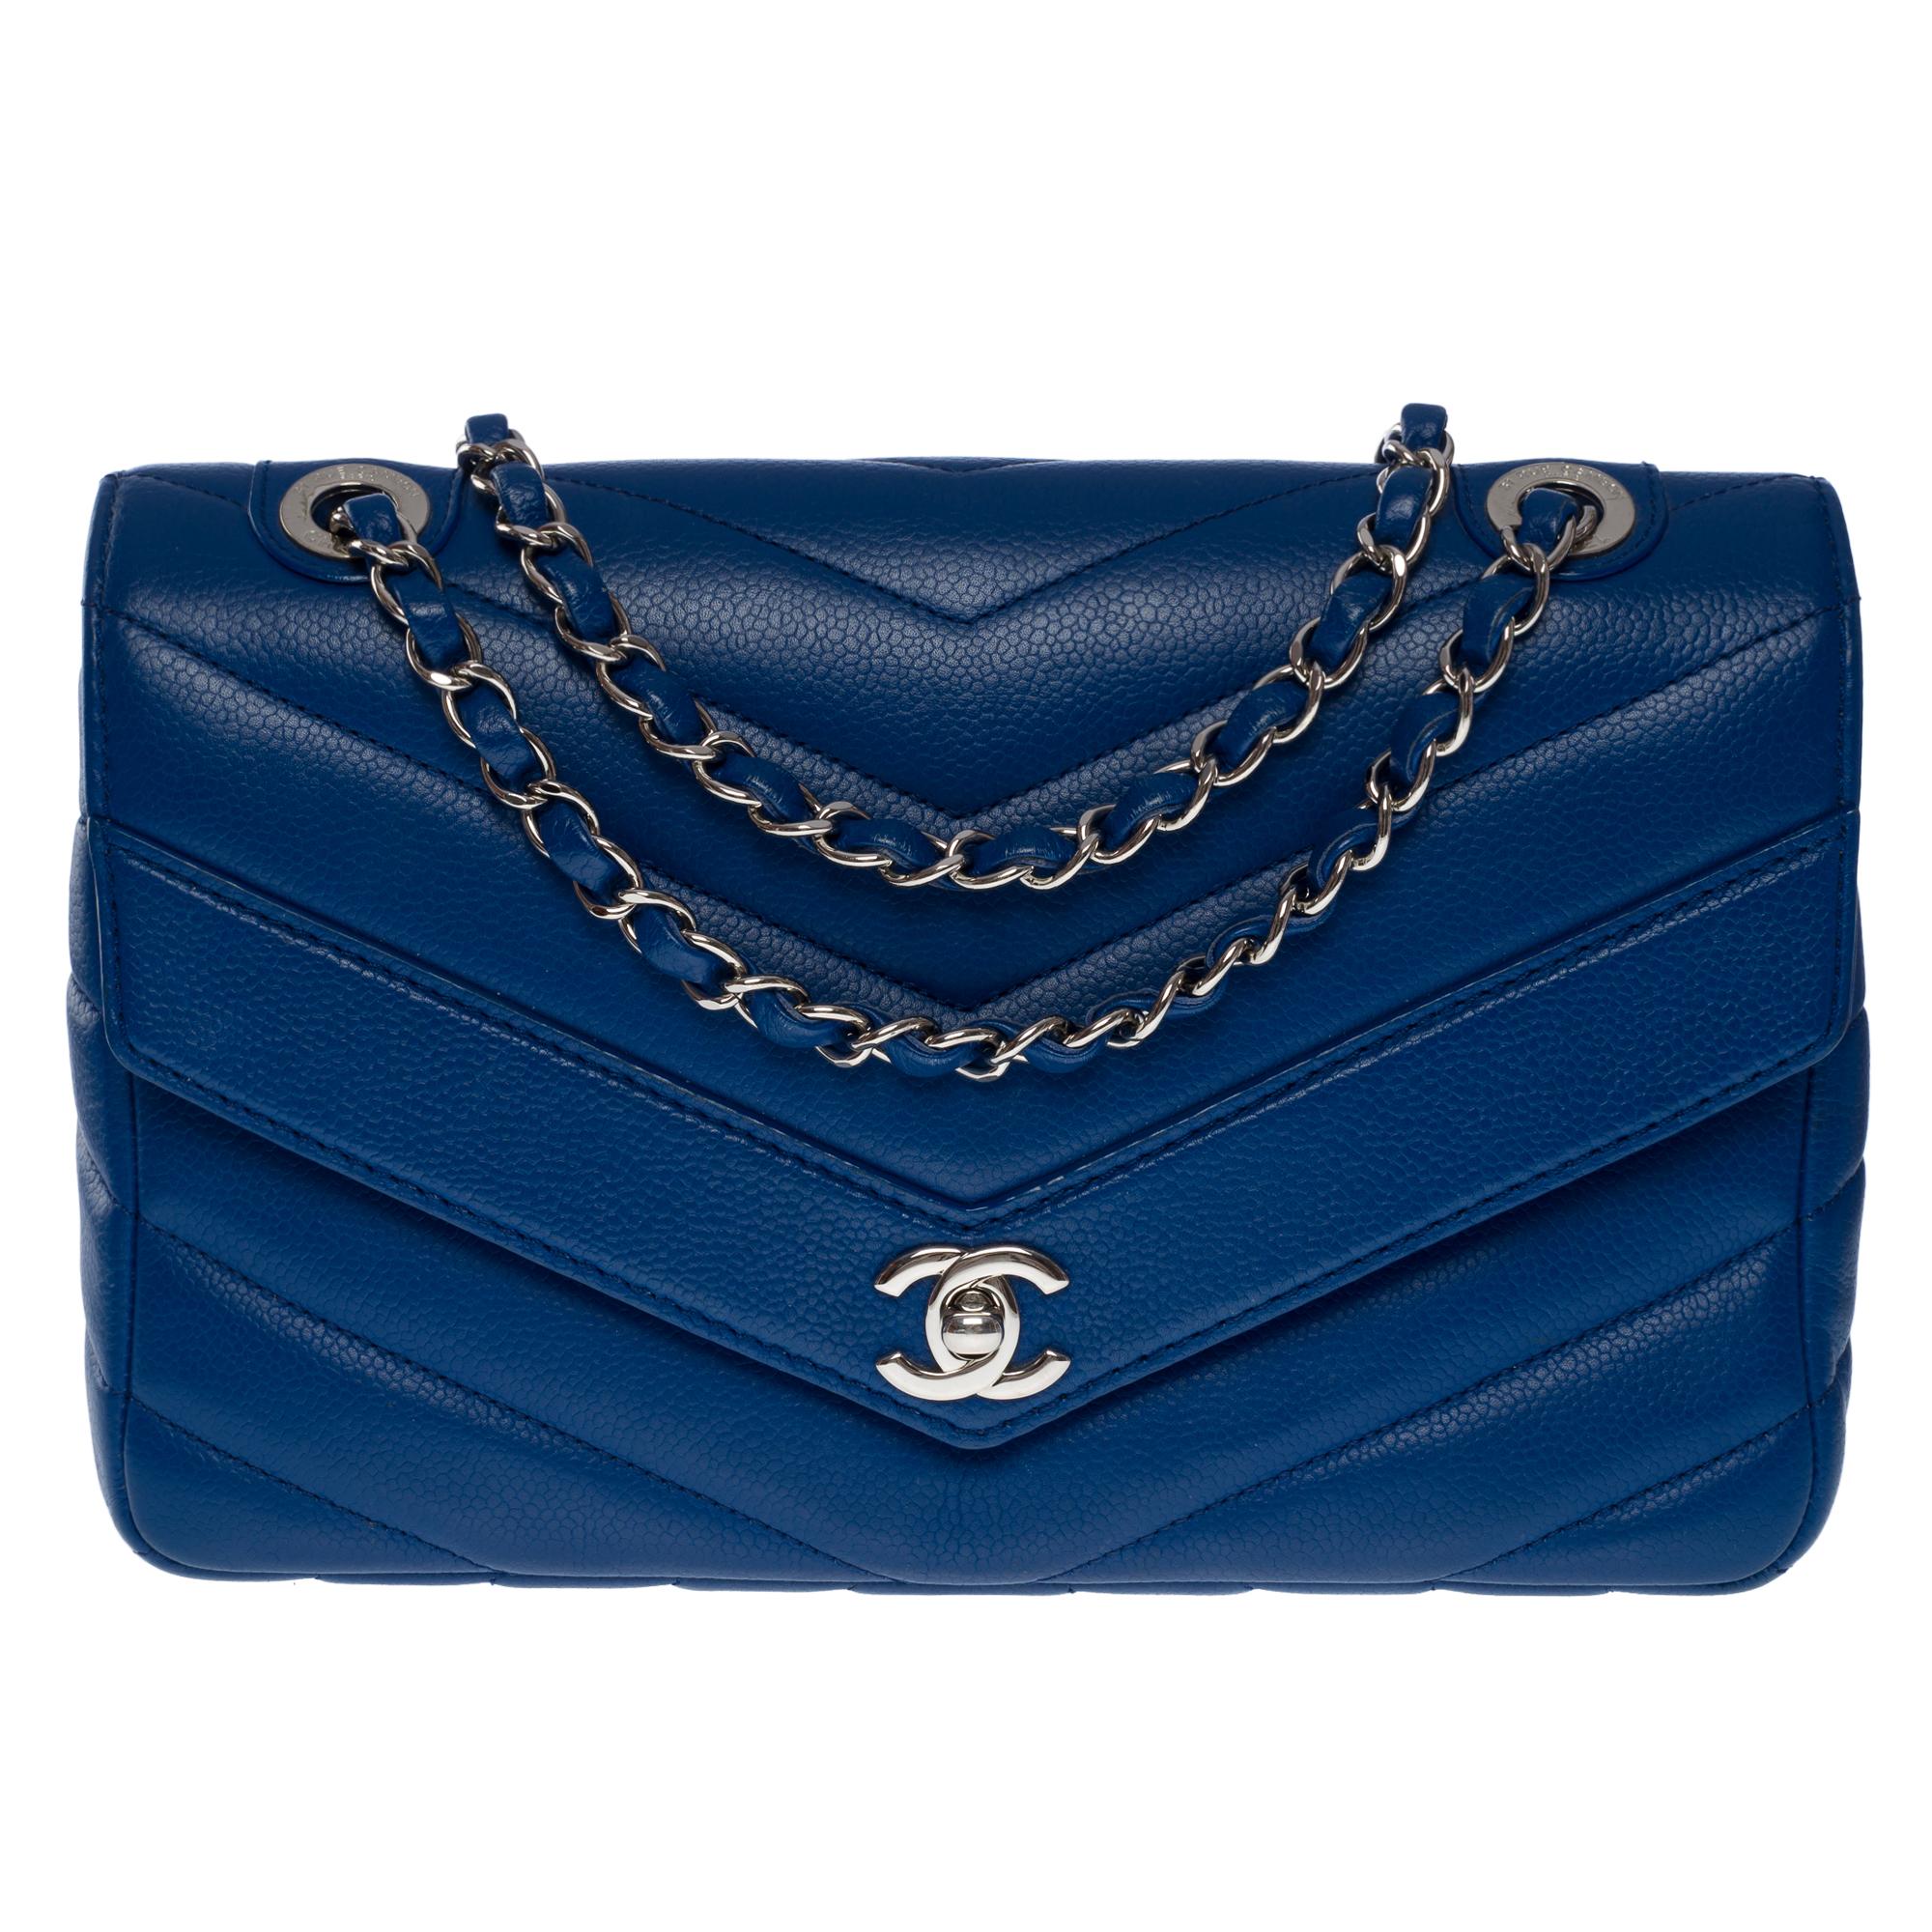 Amazing Chanel Timeless/Classic shoulder flap bag in blue herringbone quilted caviar leather, silver metal hardware, a chain-handle in silver metal interlaced with blue caviar leather for a hand, shoulder or crossbody carry

Backpack pocket
Flap